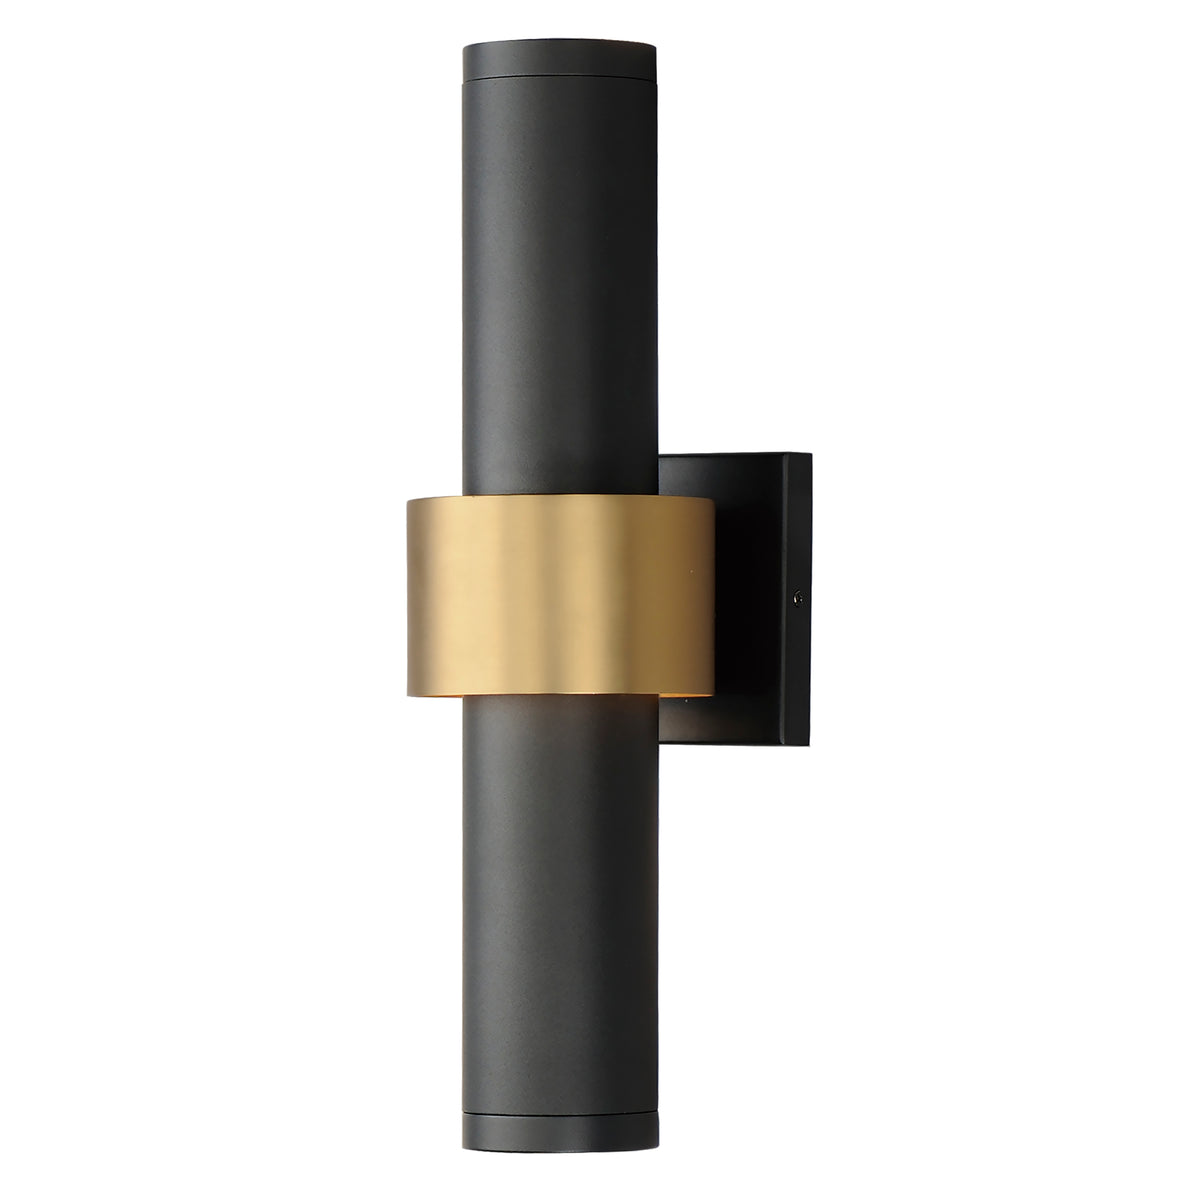 ET2 - E34756-BKGLD - LED Outdoor Wall Sconce - Reveal Outdoor - Black / Gold